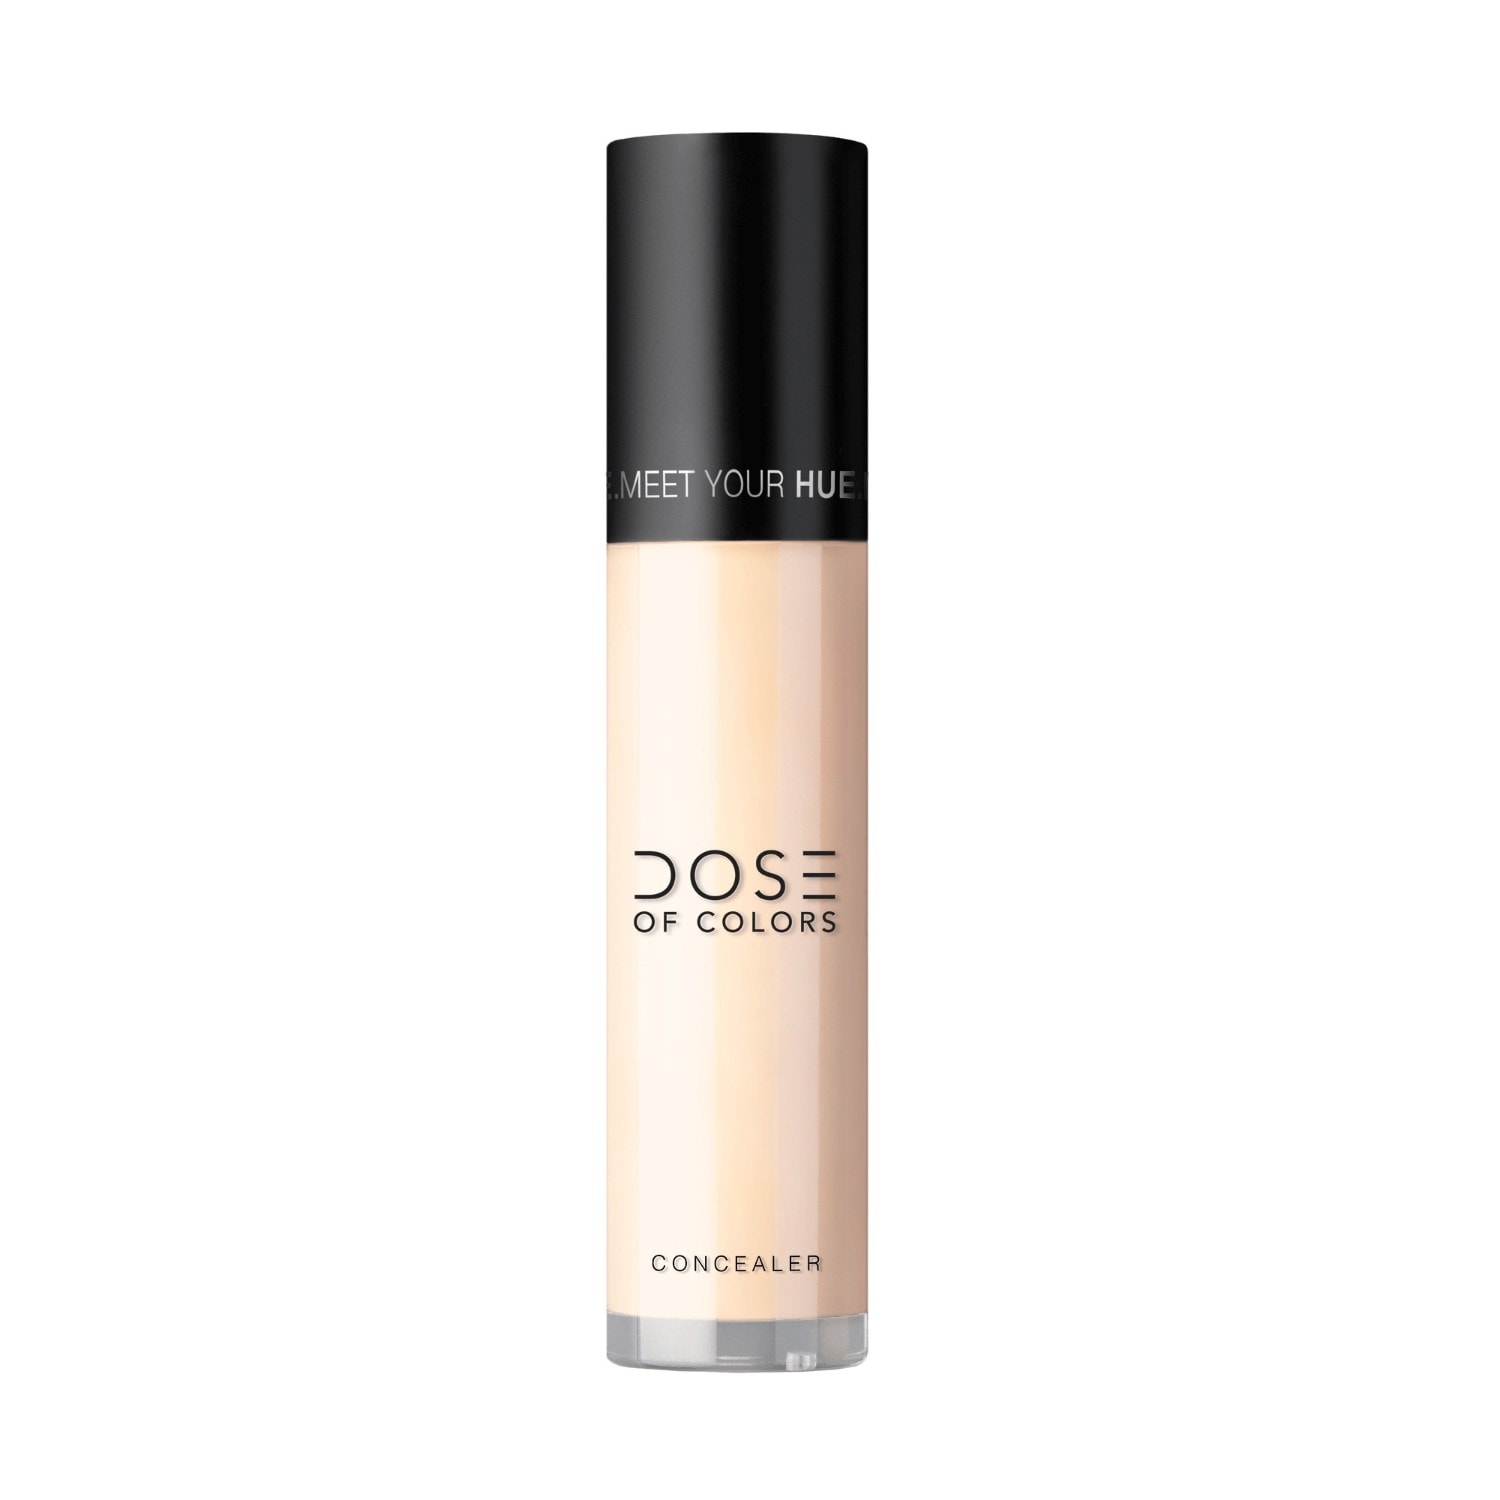 Dose of Colors Meet Your Hue Concealer, No. 10 Light